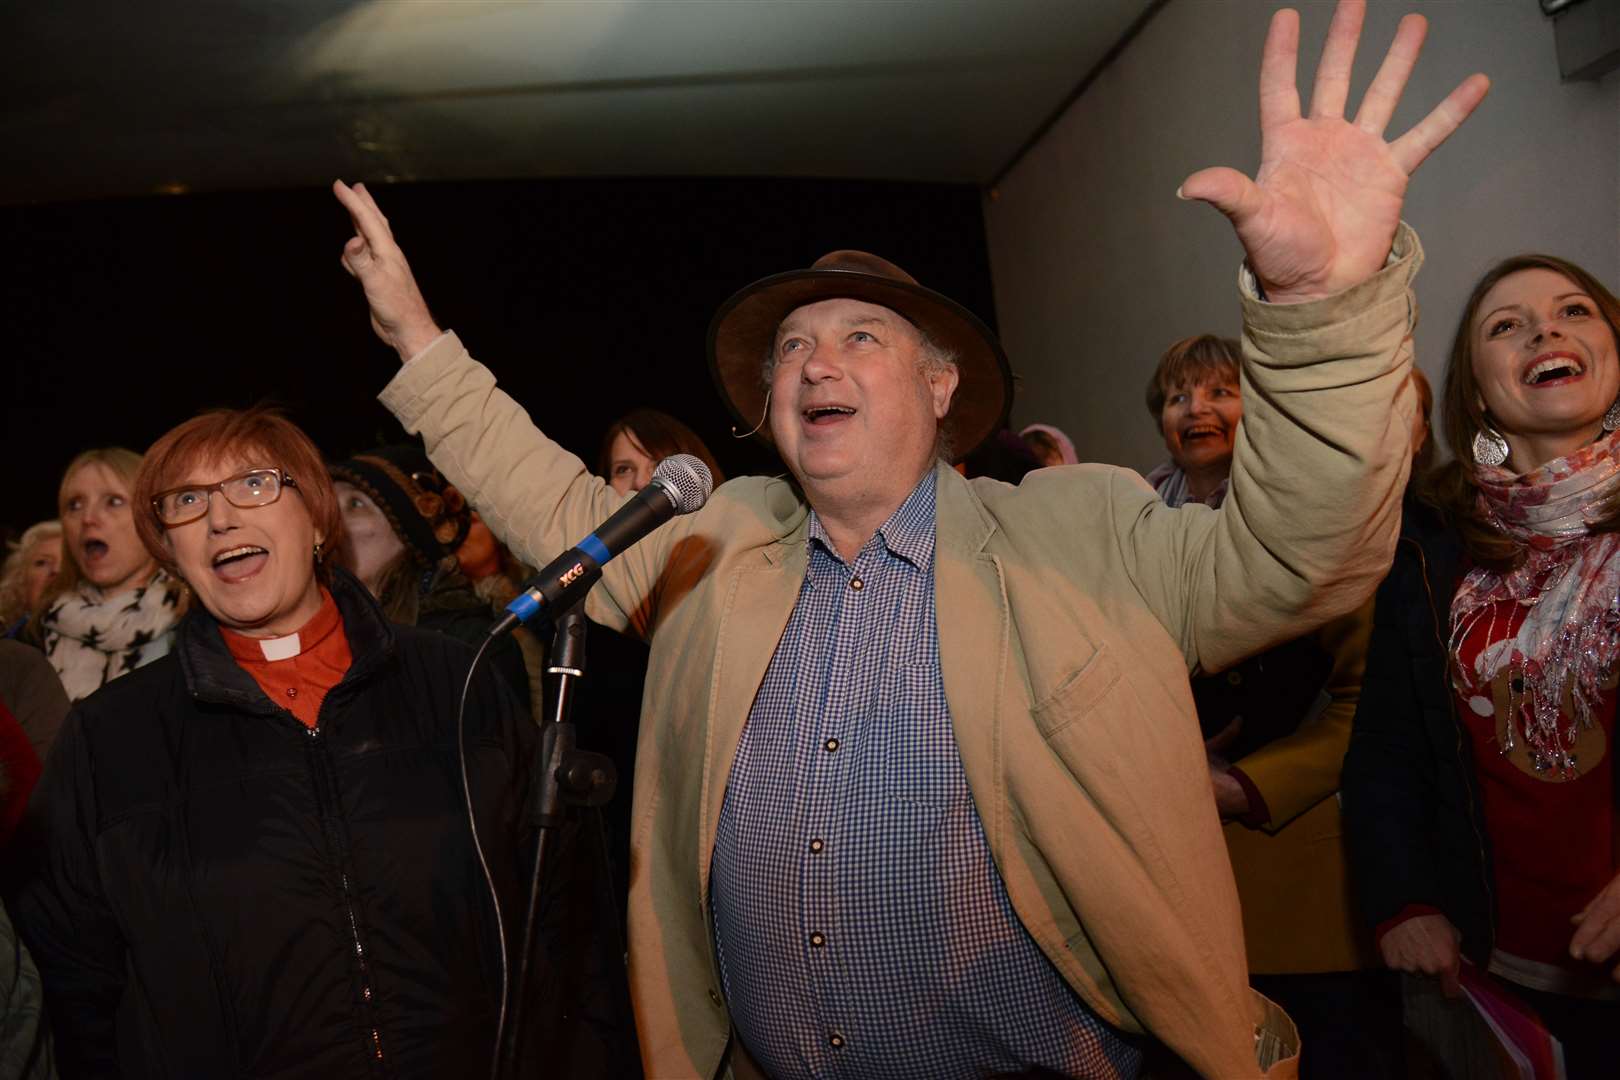 Author Louis de Bernieres switched on the Christmas lights at last year's Folkestone Book Festival